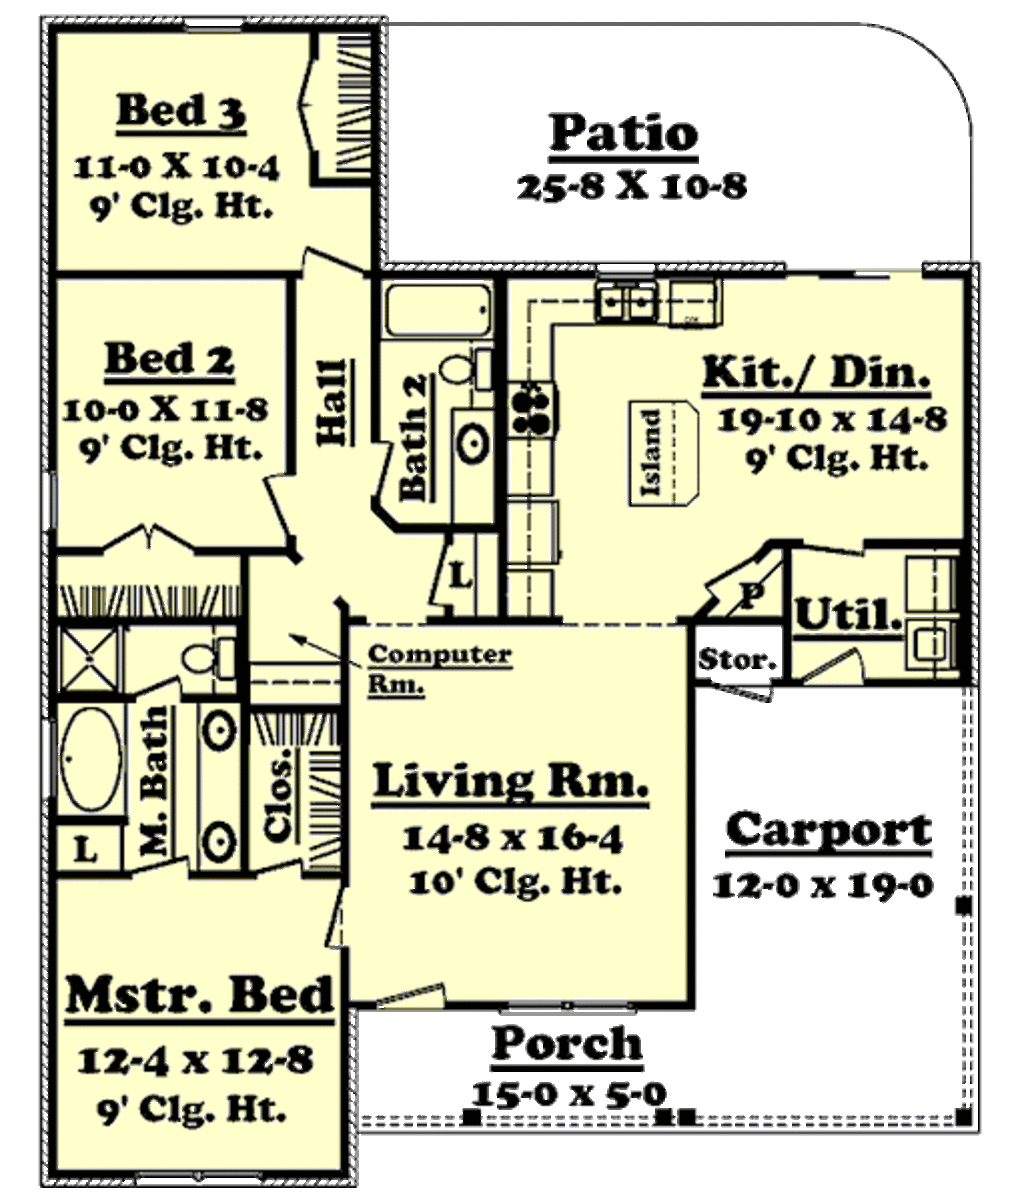 Country Style House Plan 3 Beds 2 Baths 1350 Sq Ft Plan 430 6